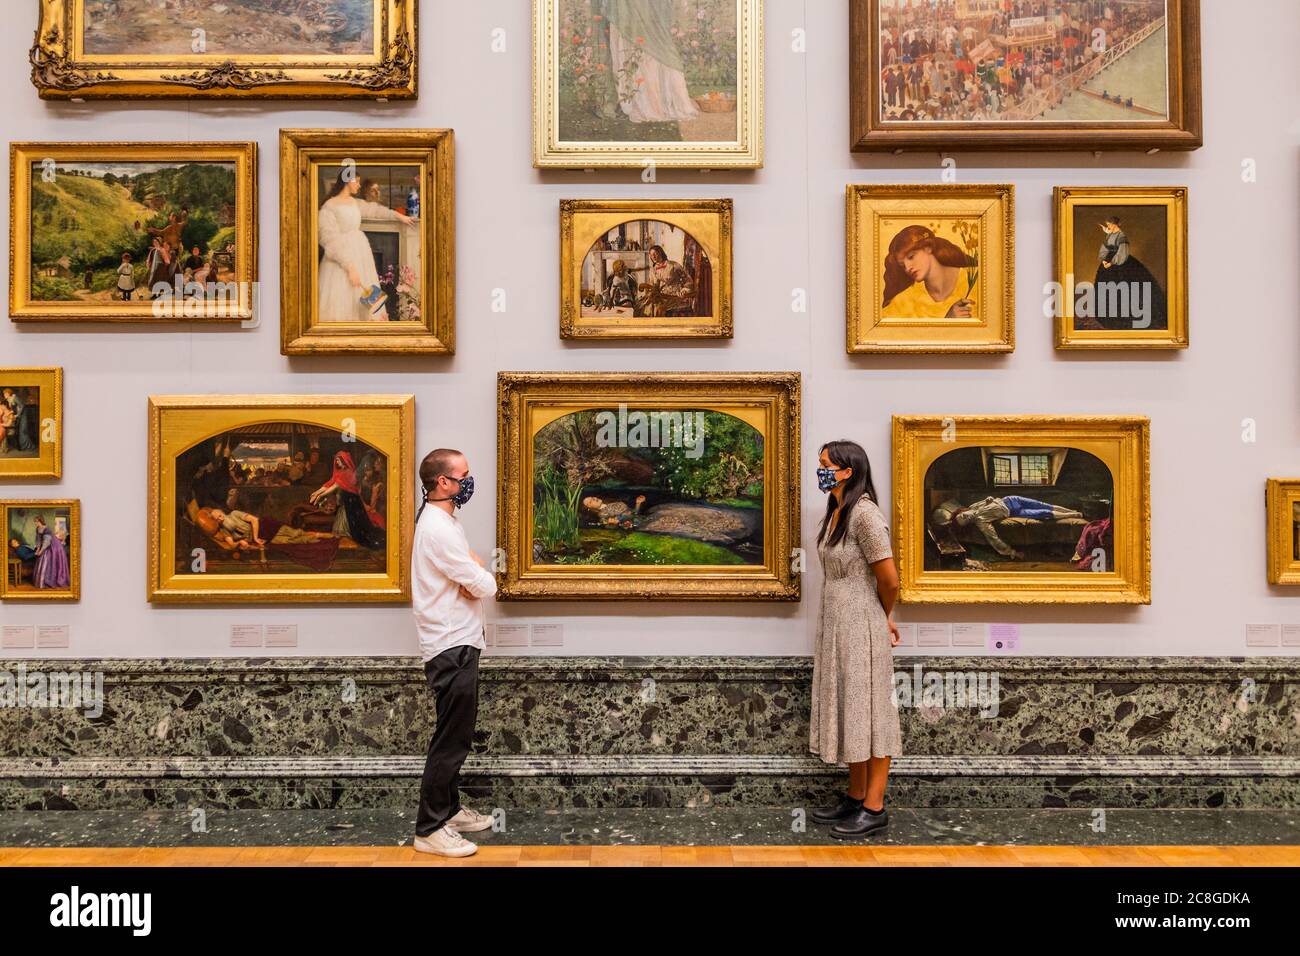 London, UK. 24th July, 2020. Ophelia by Millais - Works in the 1840's gallery - The Tate Britain re-opens on Monday. Visitors are asked to follow guidance on social distancing etc, in line with advice from government following the easing of the lockdown. Credit: Guy Bell/Alamy Live News Stock Photo